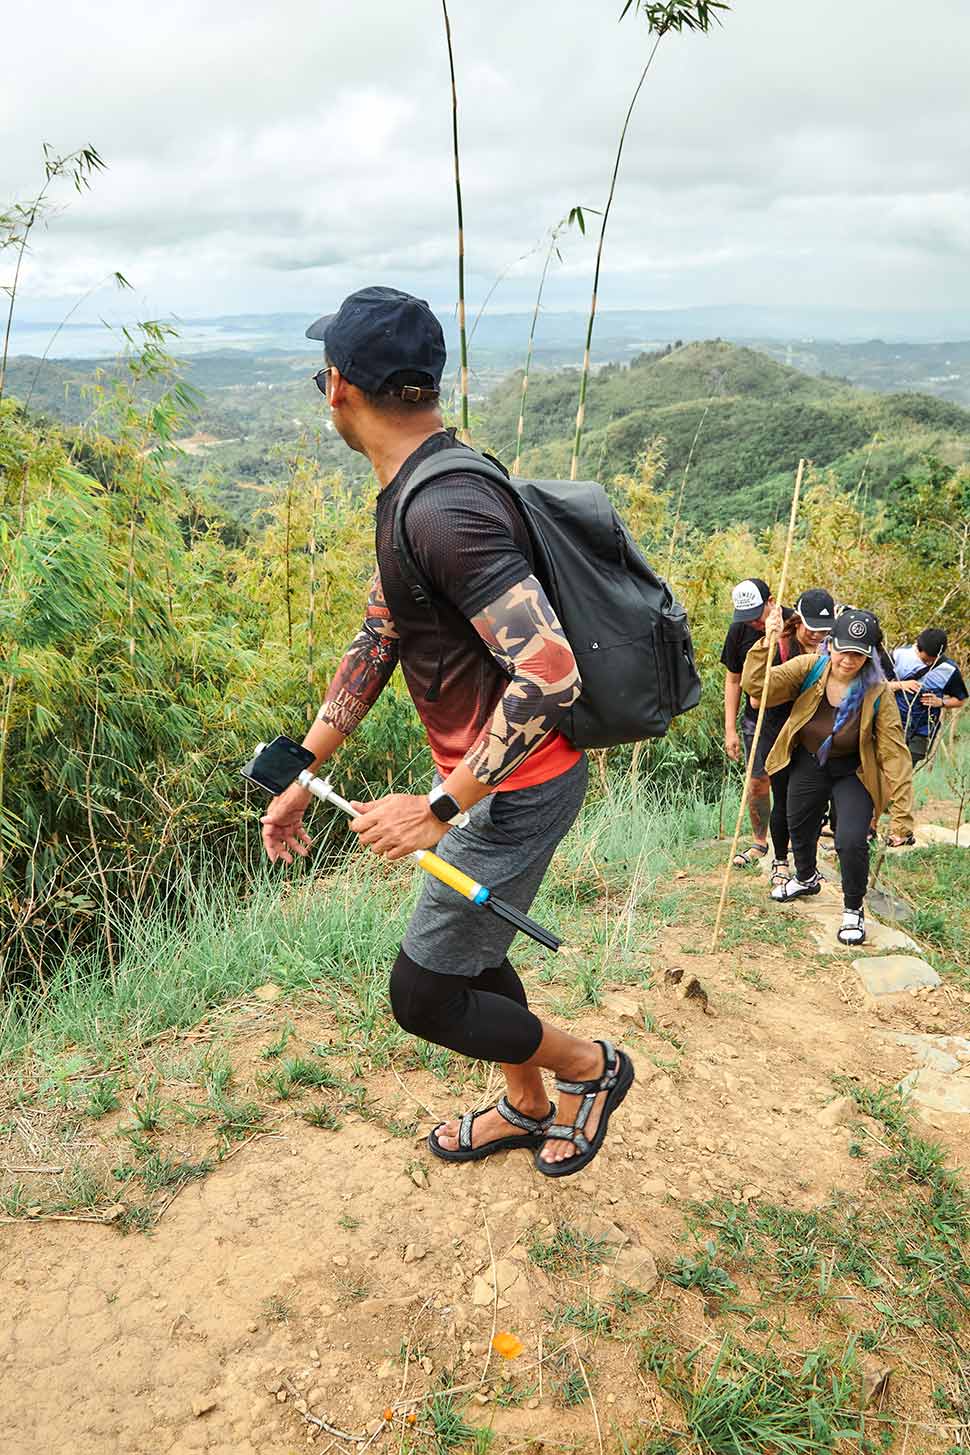 Are Tevas Good for Hiking?